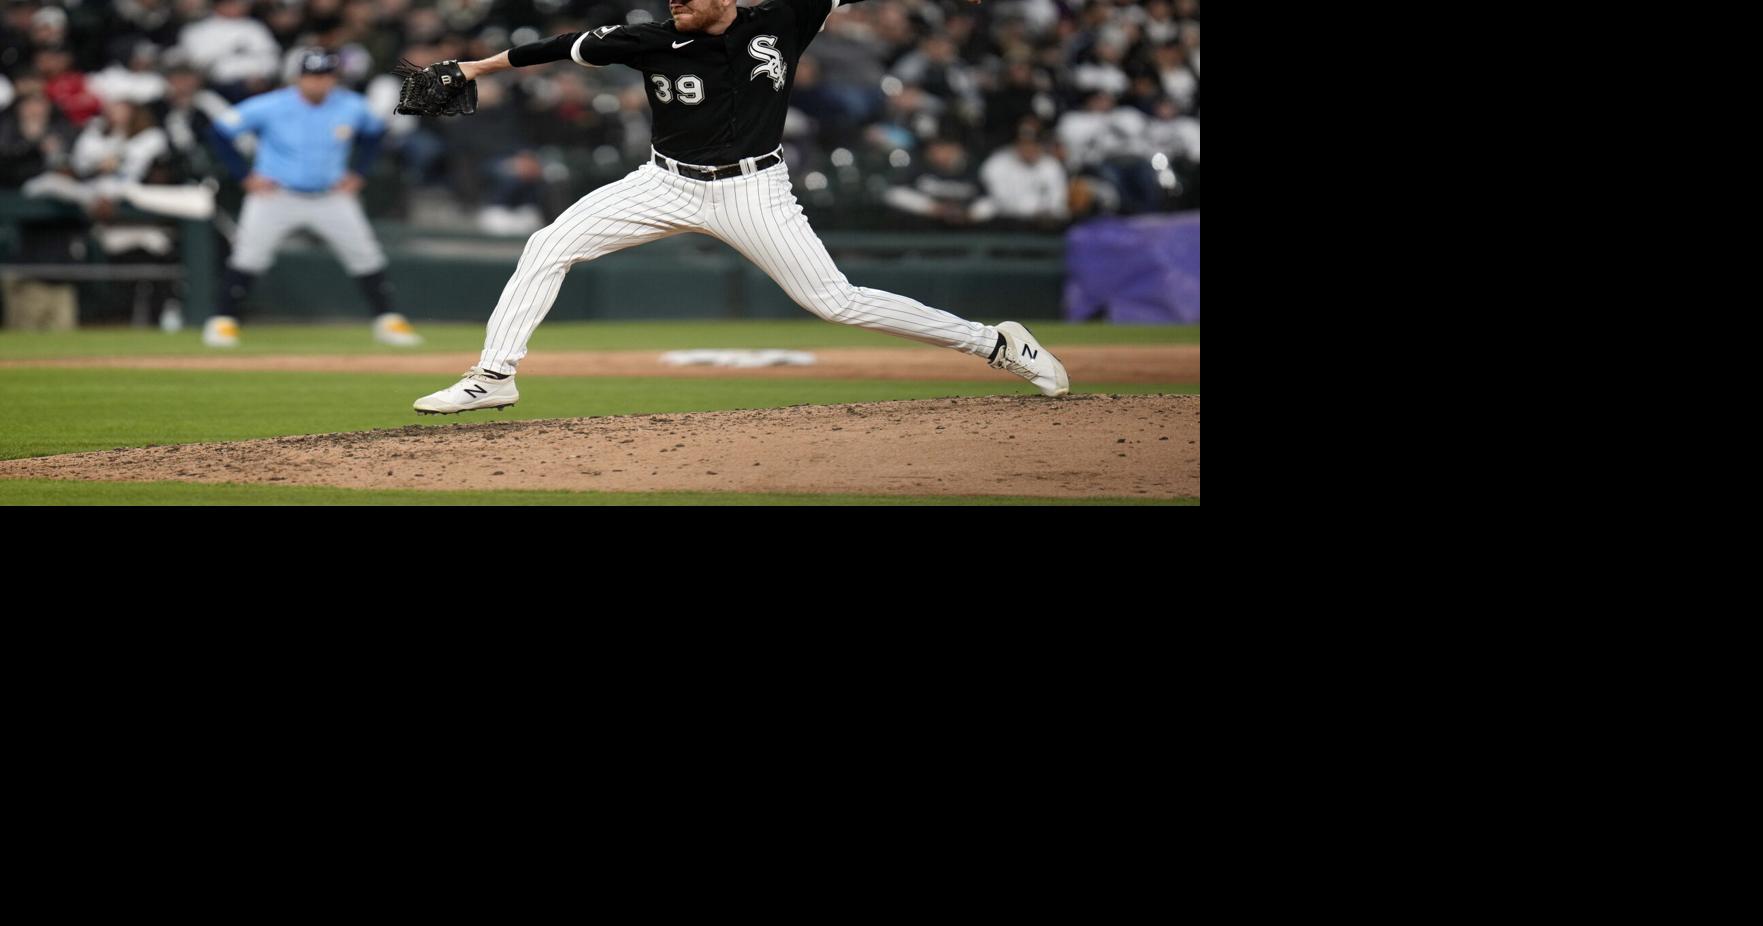 Sale throws 2-hitter, White Sox beat Rays 1-0